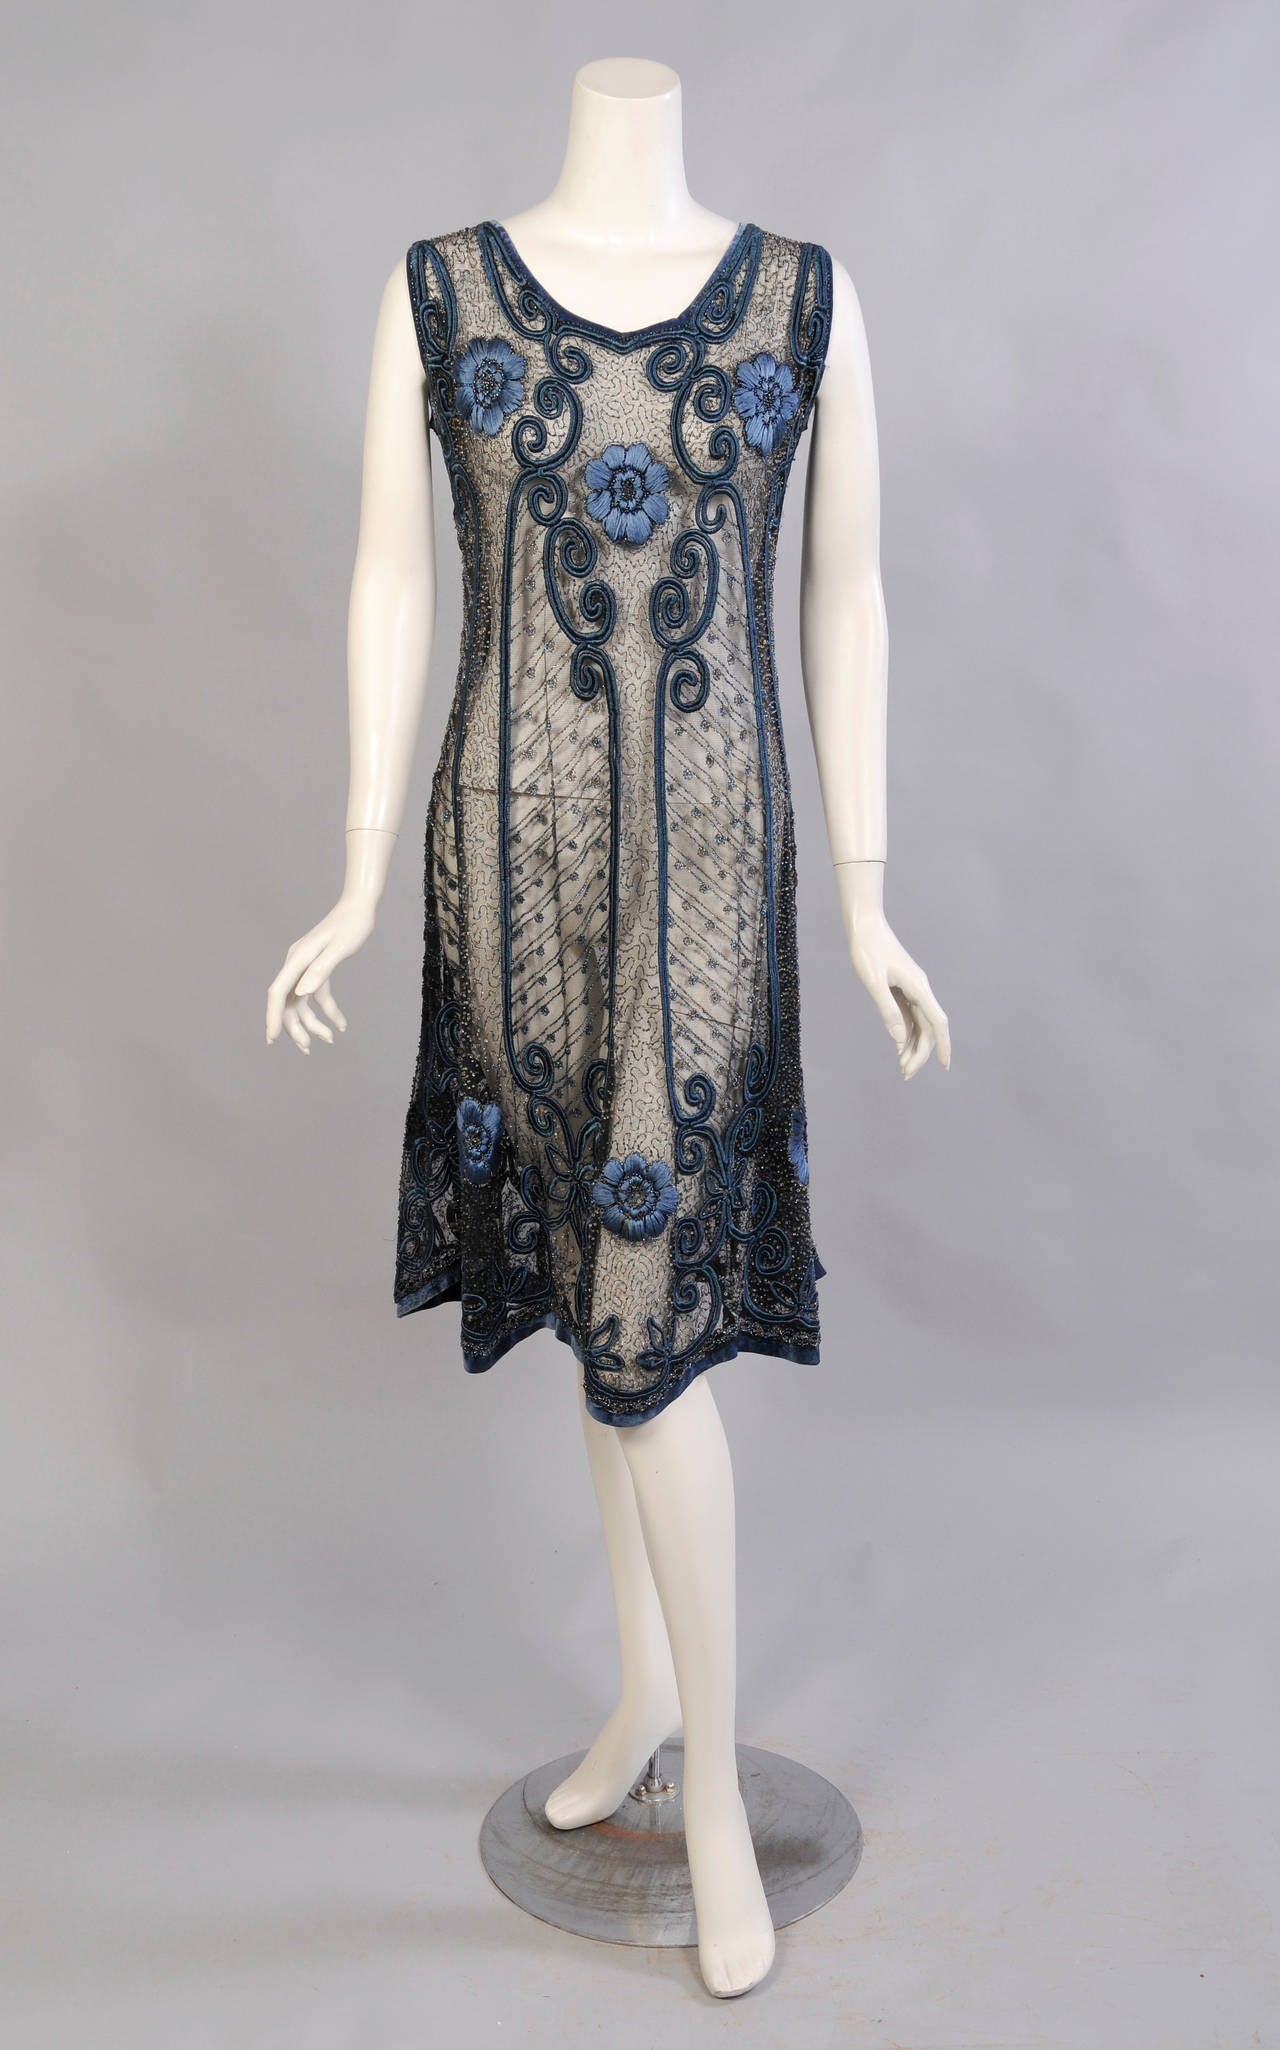 Fine black net is beaded with an all over vermicelli pattern using blue and clear caviar beads. The dress is embroidered with a matching blue silk floss for the flowers and scrolling designs. The neckline, arm hole and hem are bound in a matching